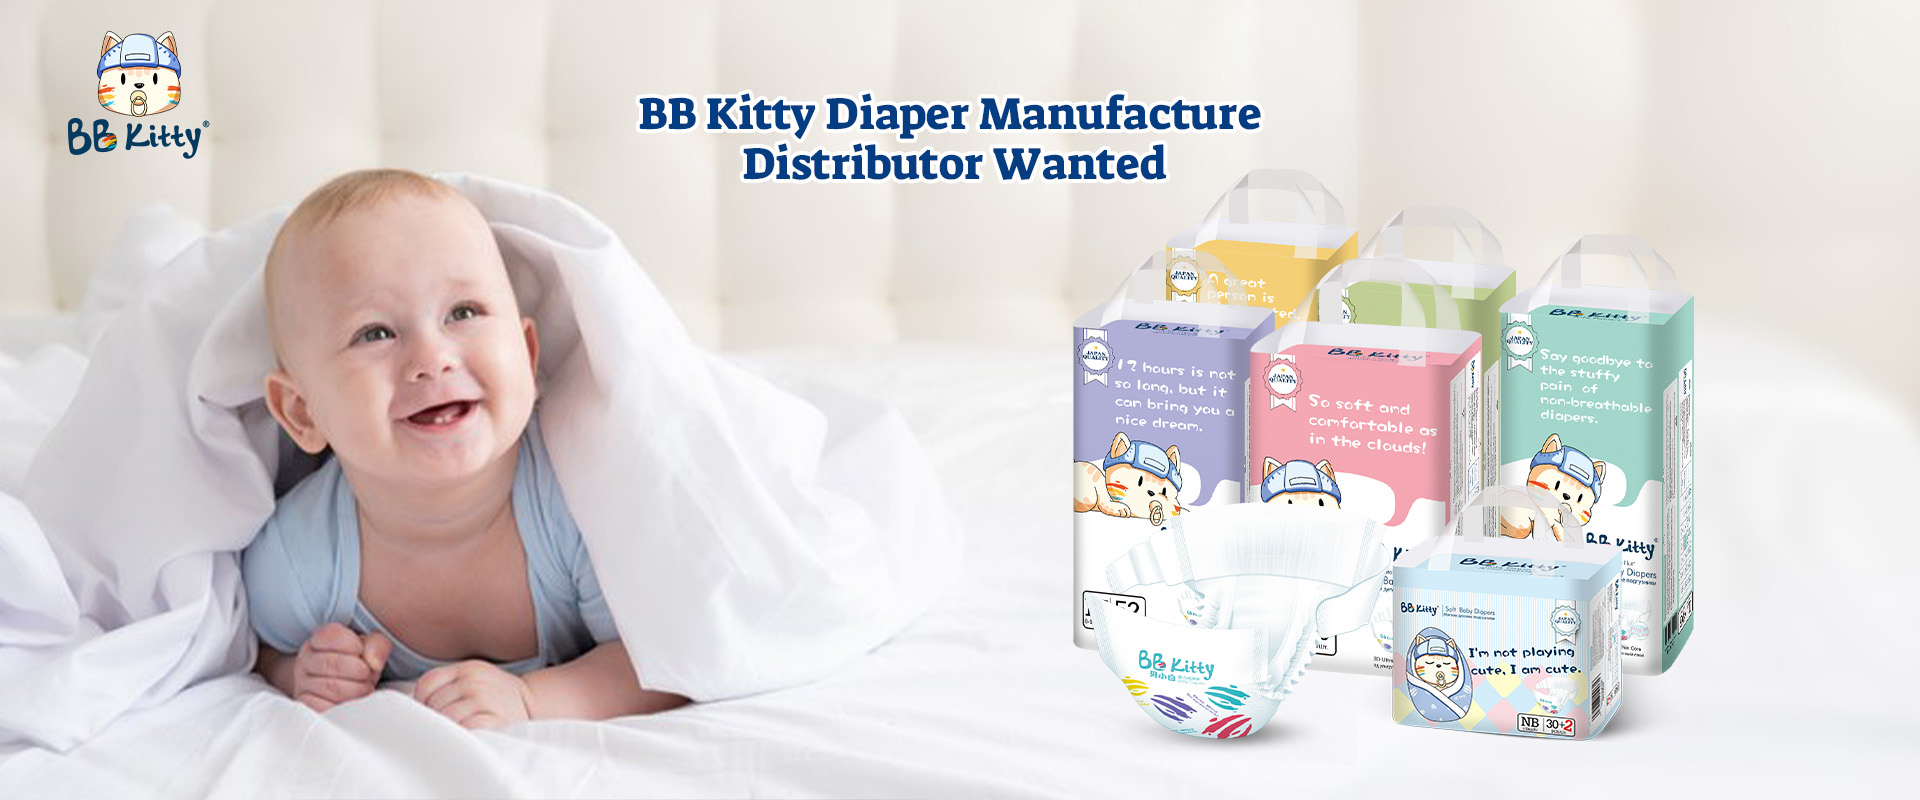 BB Kitty Diaper Manufactures